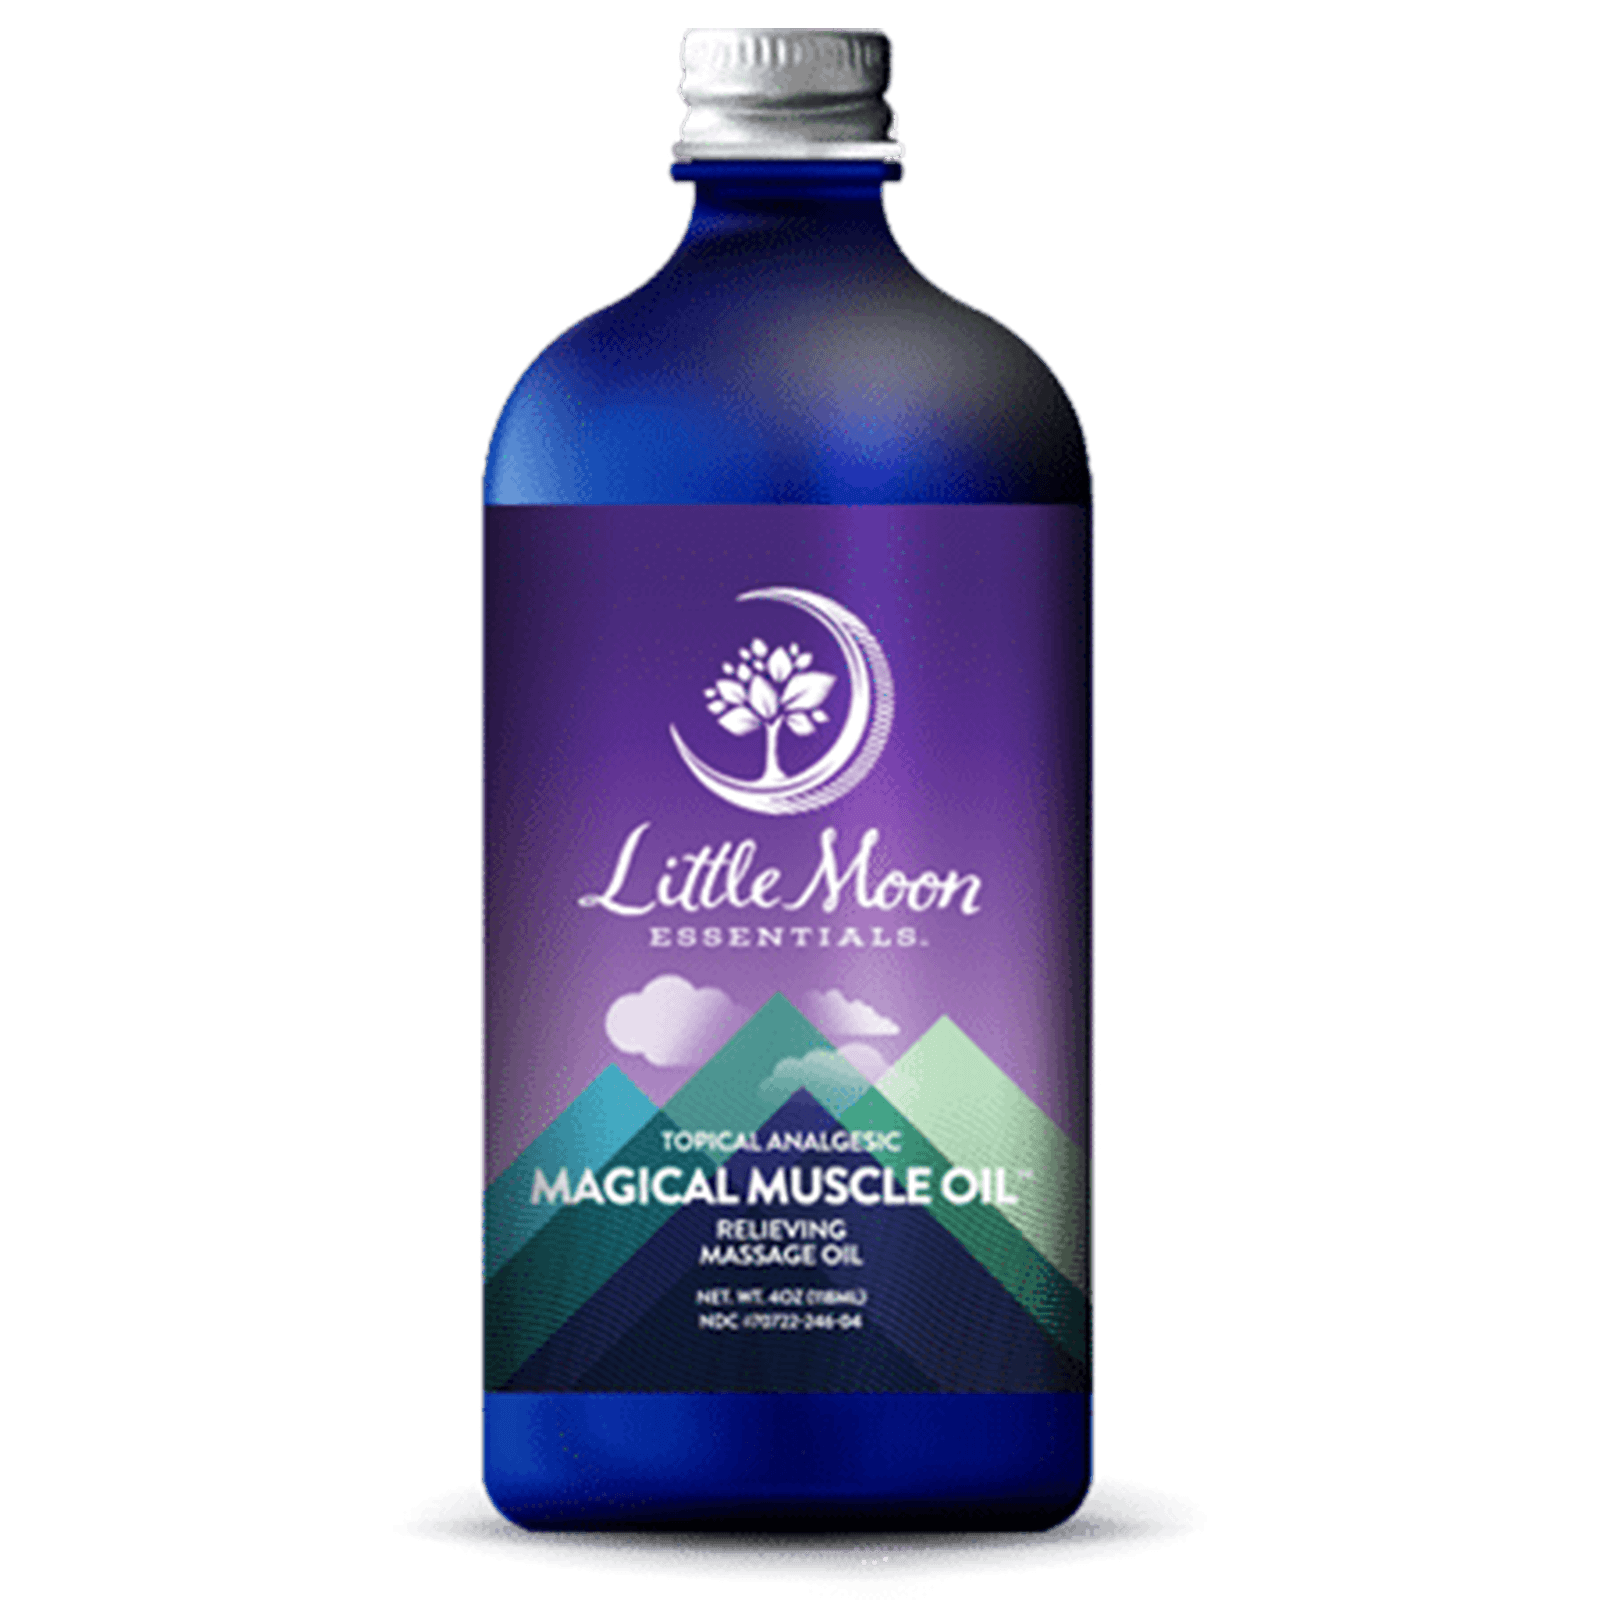 Magical Muscle Oil™ - Little Moon Essentials